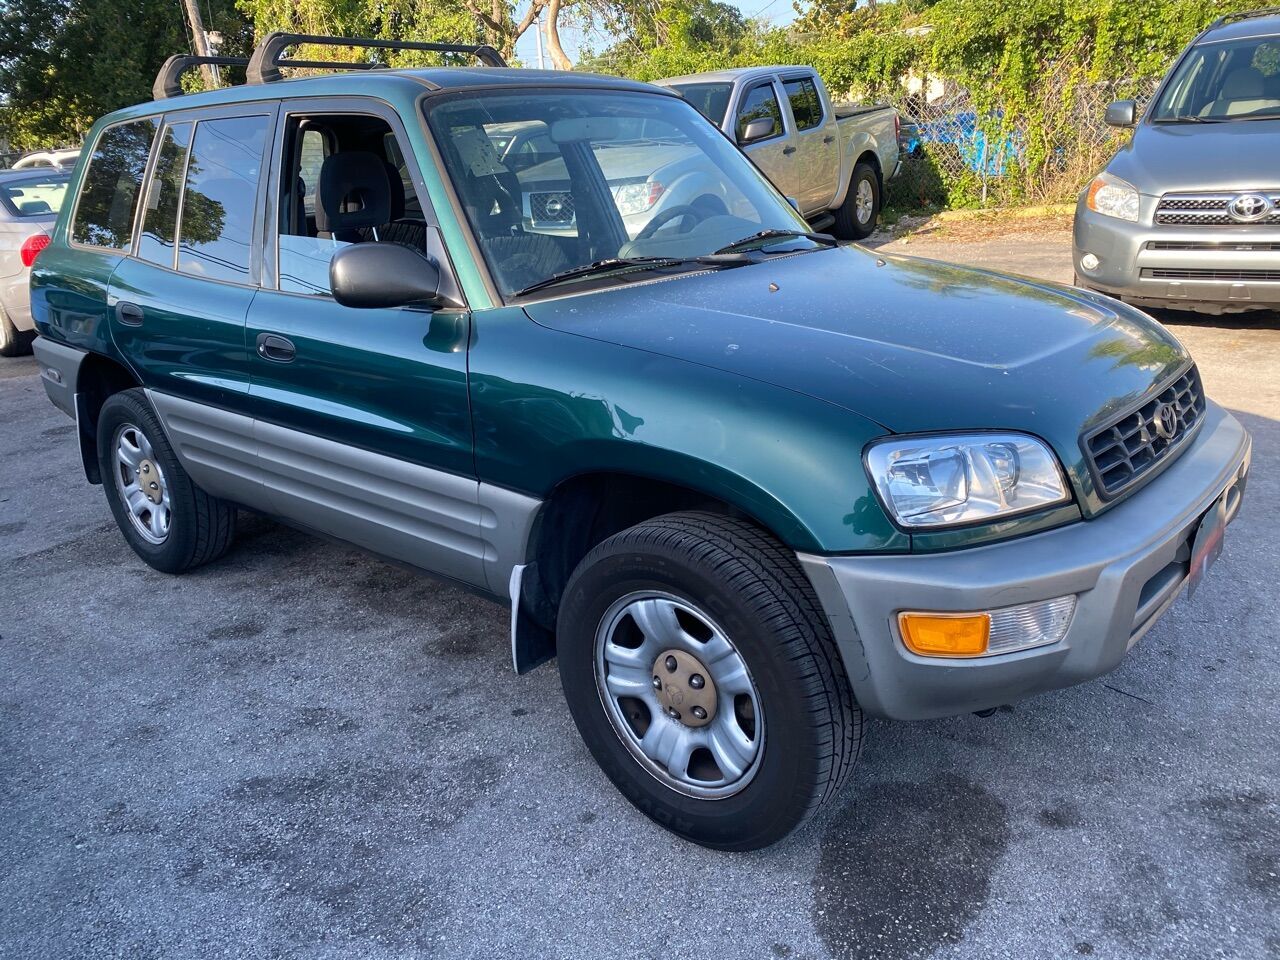 Used 2000 Toyota RAV4 For Sale In Los Angeles, CA - Carsforsale.com®